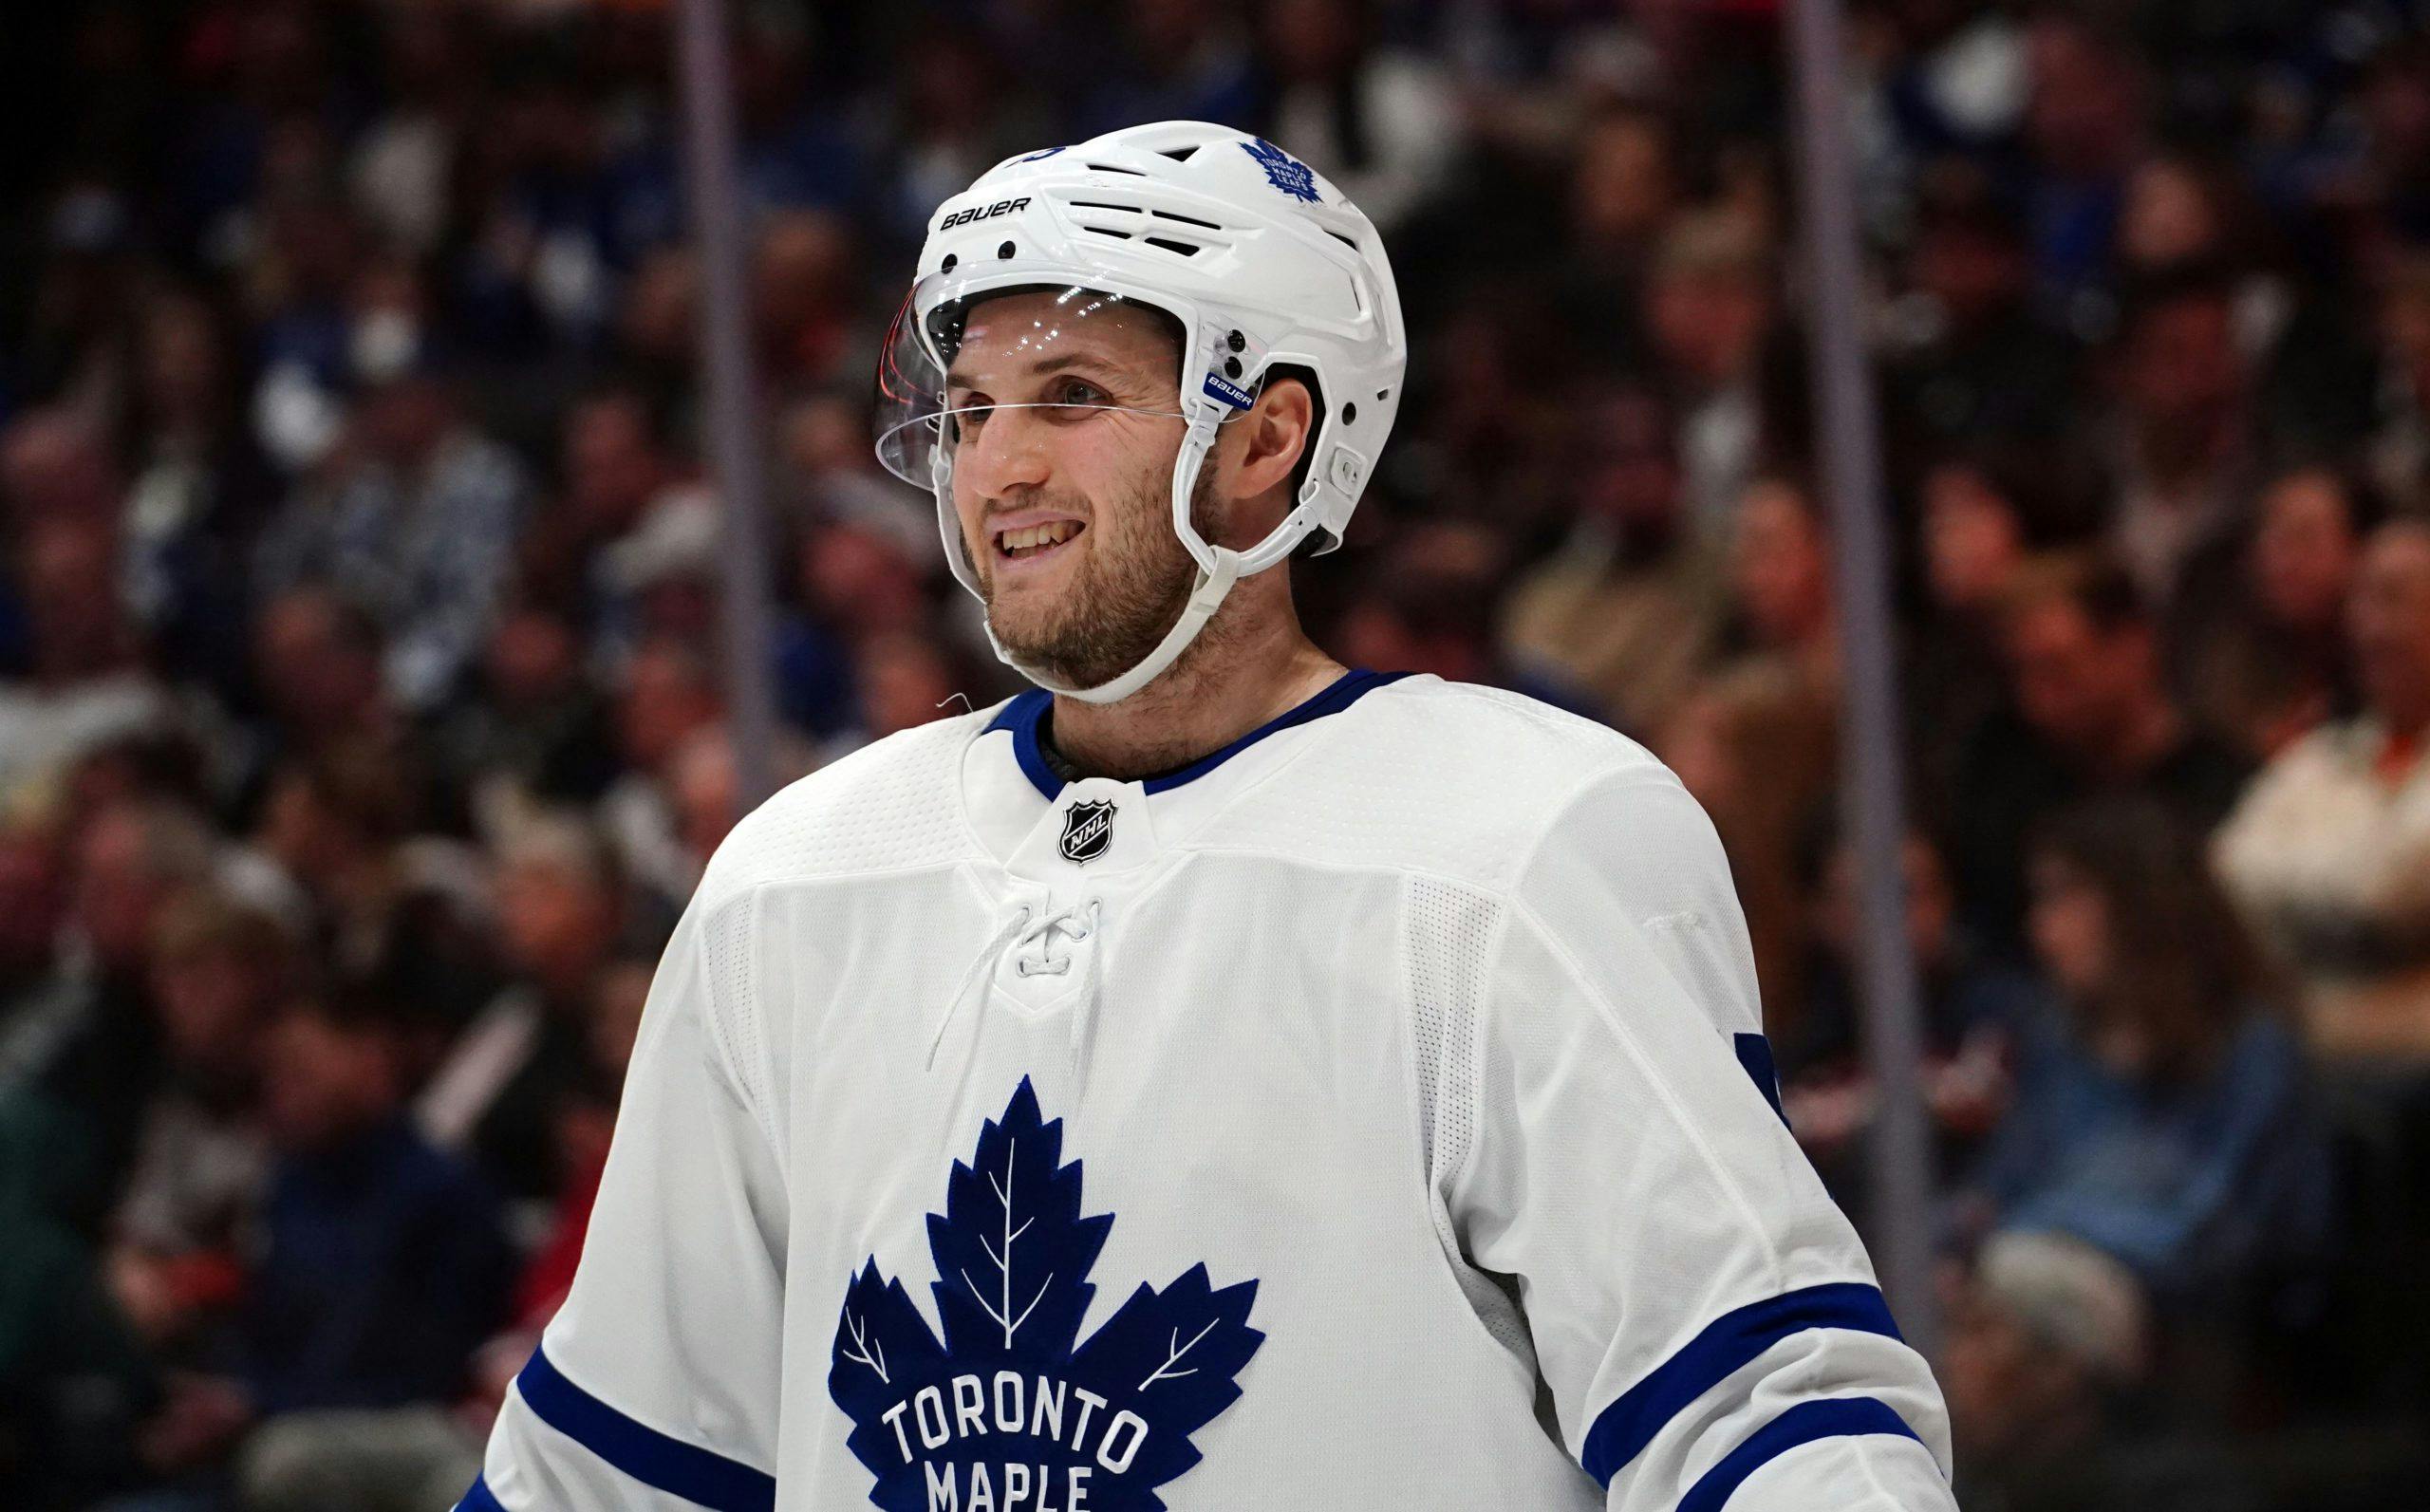 Do the Toronto Maple Leafs see Alex Kerfoot as an expendable asset?